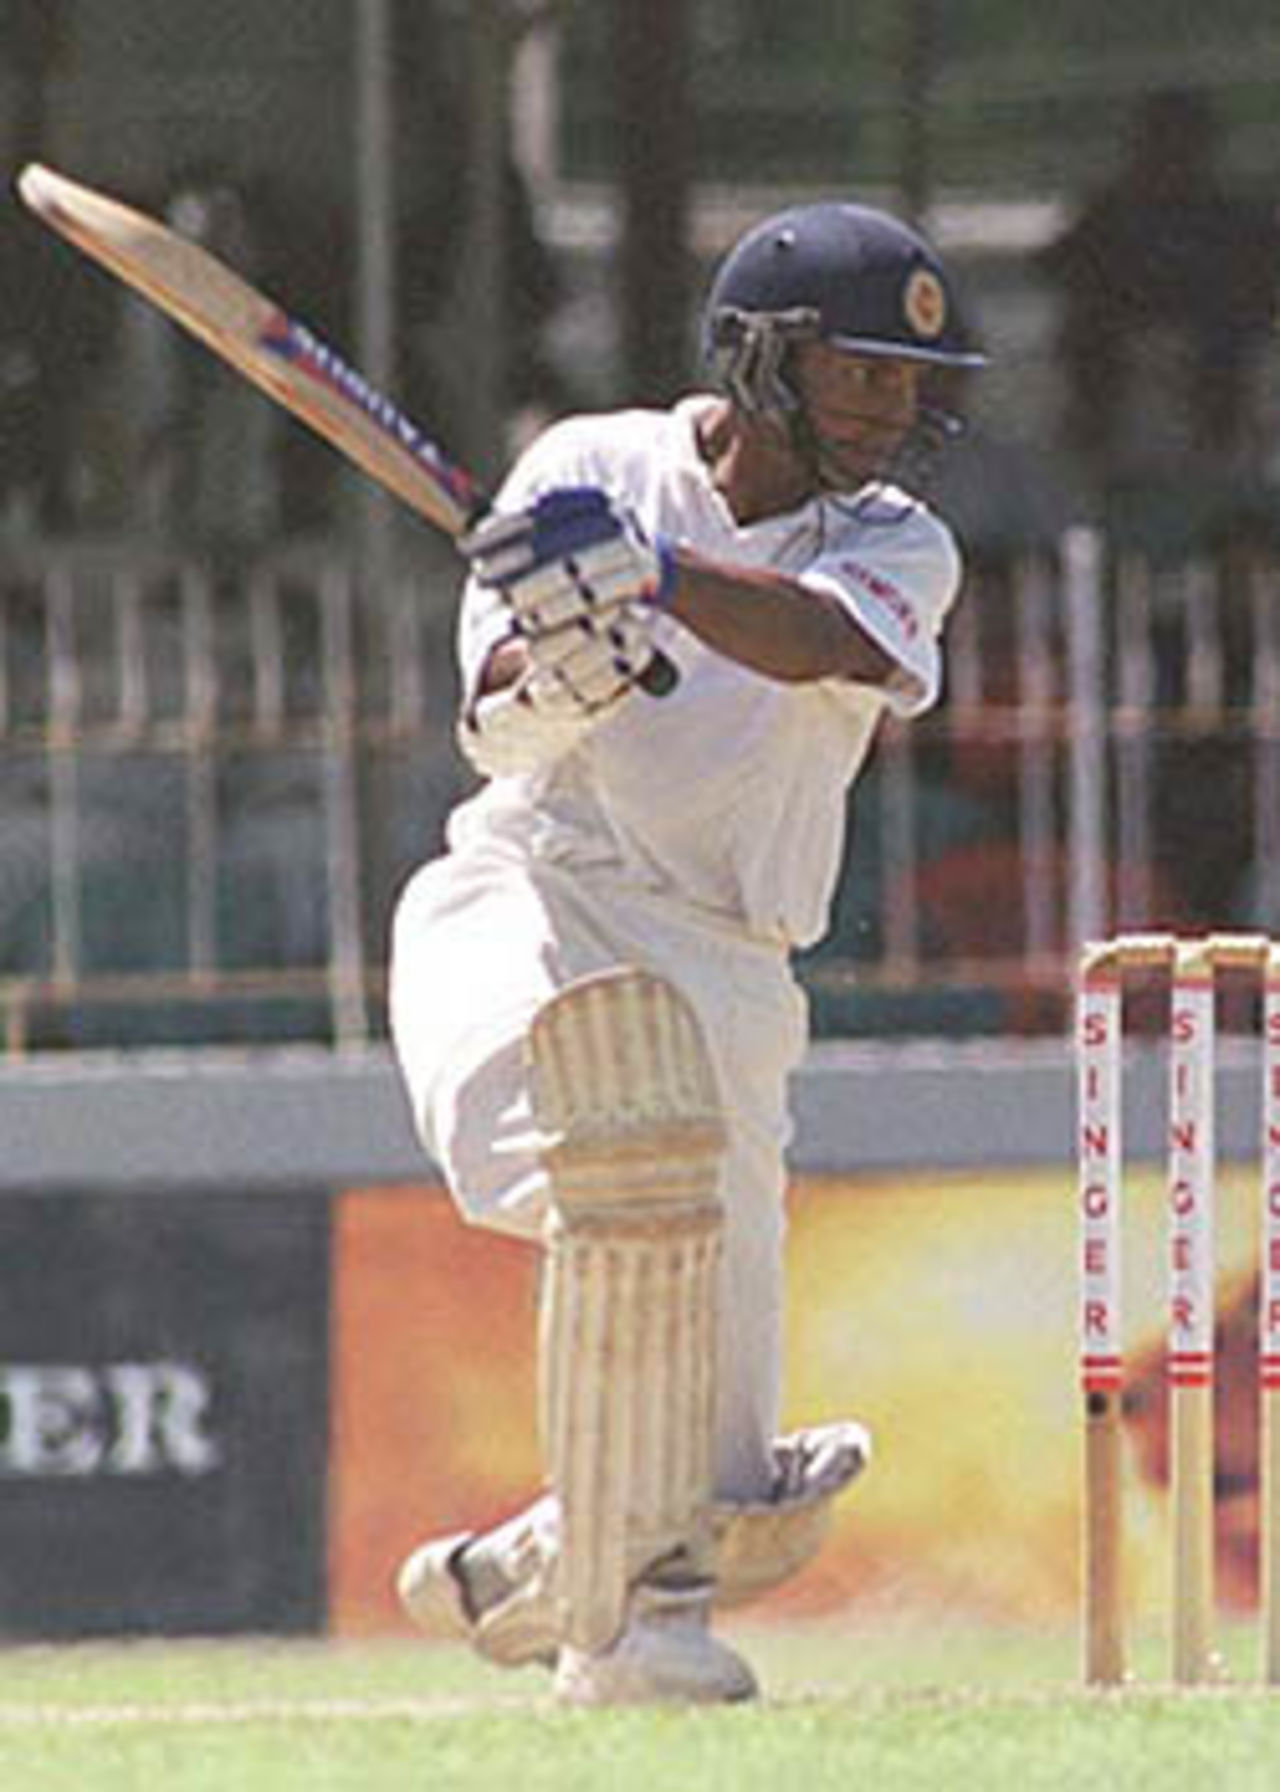 Sangakkara smashes the ball square of the wicket through the offside, South Africa in Sri Lanka, 2000/01, 3rd Test, Sri Lanka v South Africa, Sinhalese Sports Club Ground, Colombo, 06-10 August 2000 (Day 3).